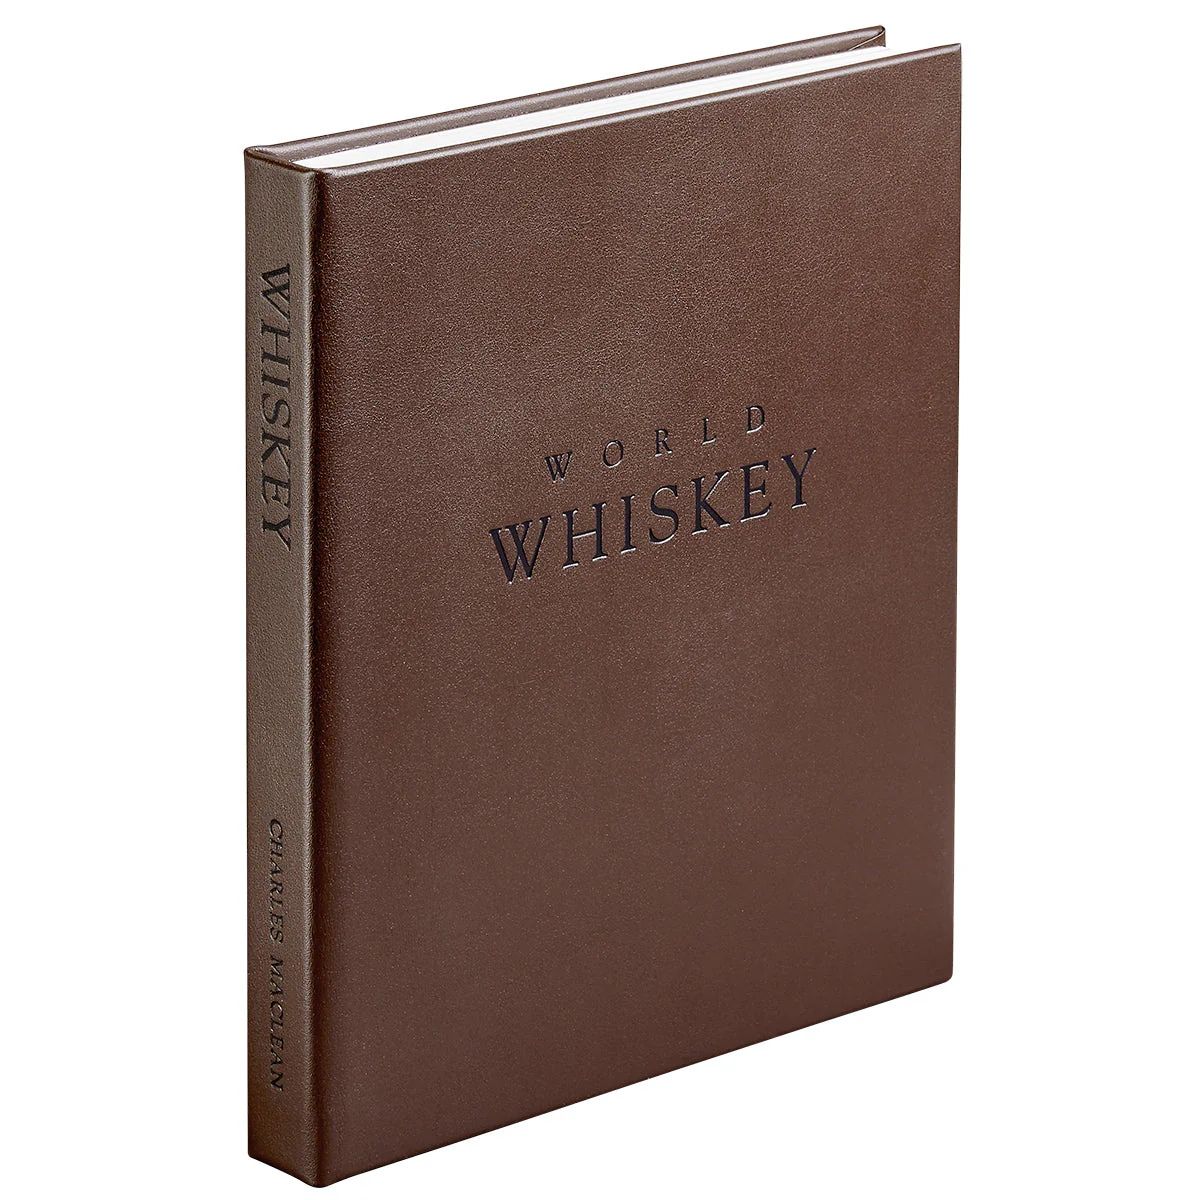 World Whiskey Book in Bonded Leather | Over The Moon